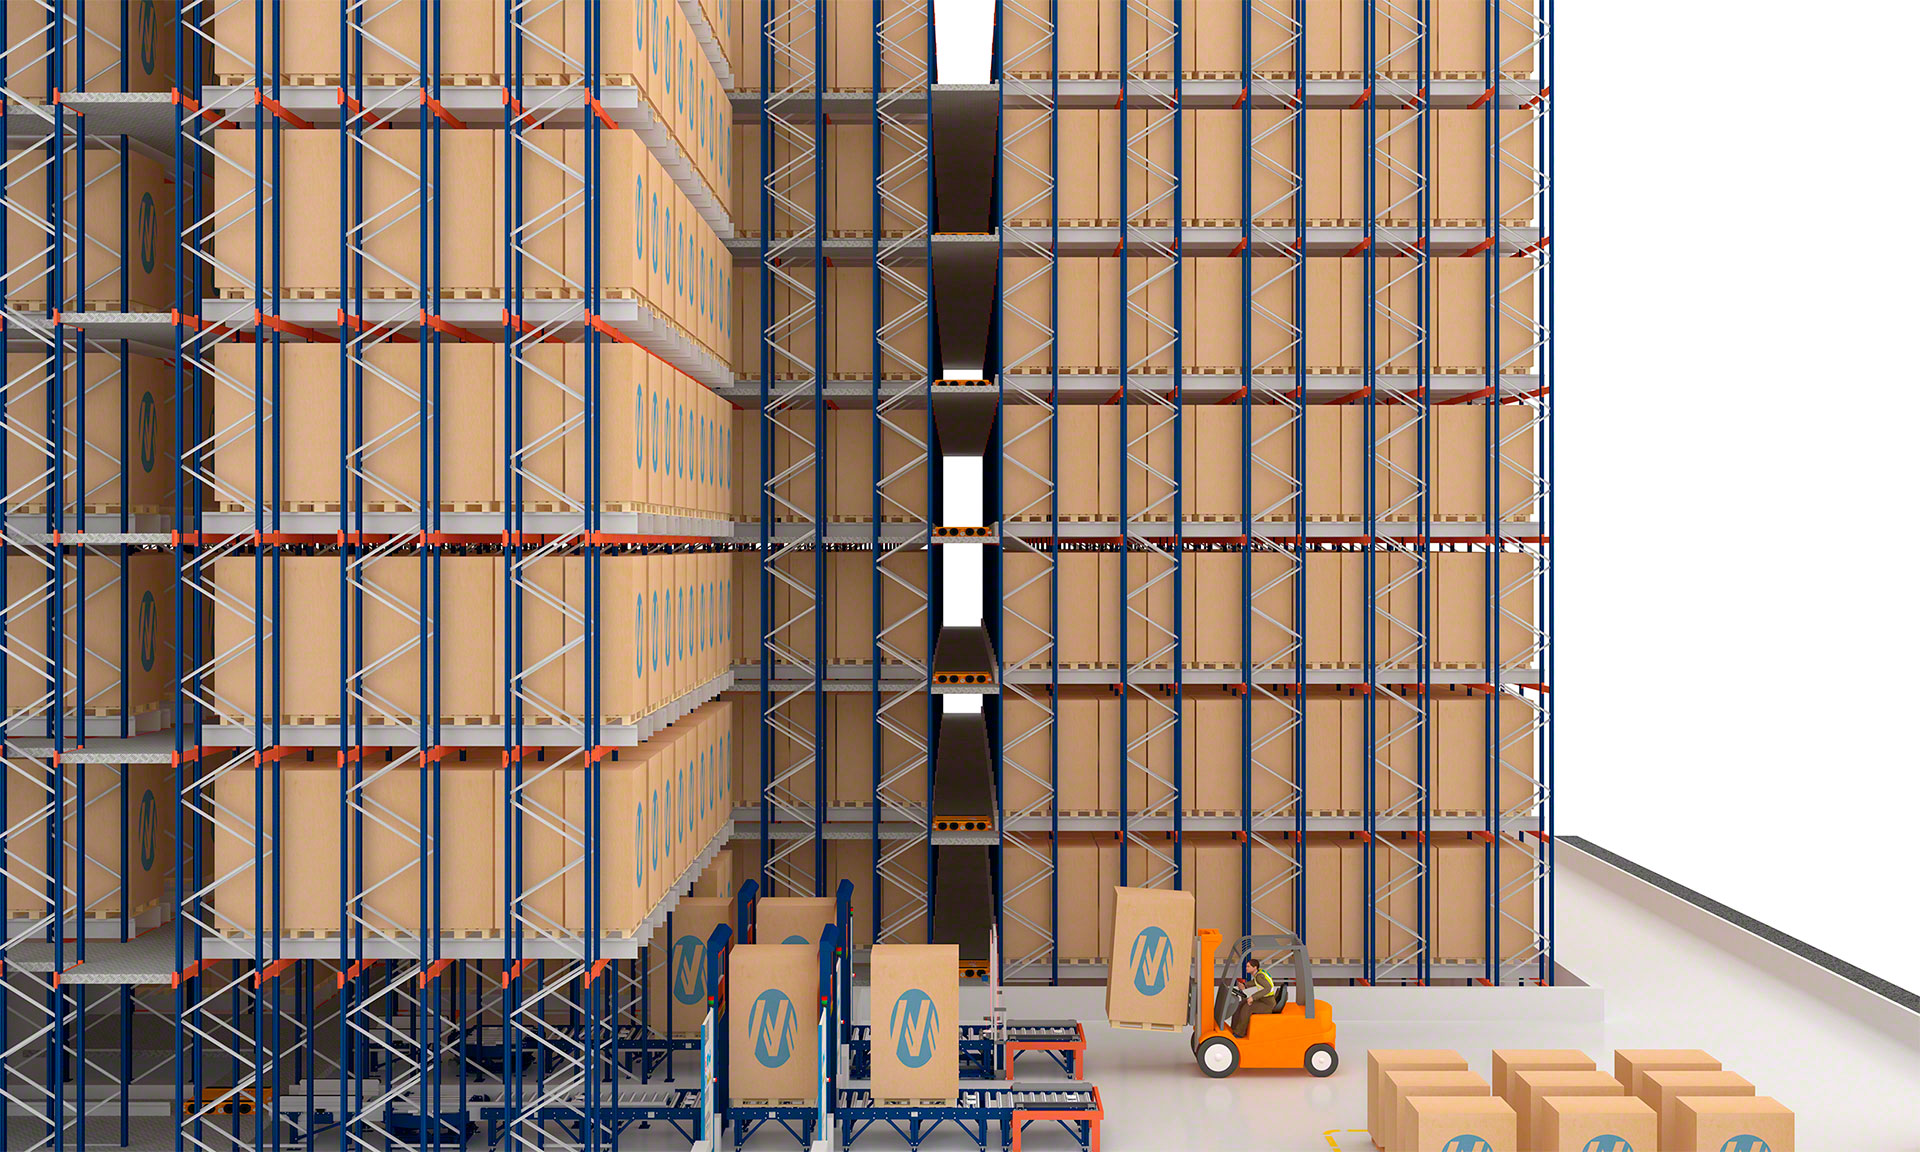 The 3D Automated Pallet Shuttle optimizes space to boost capacity